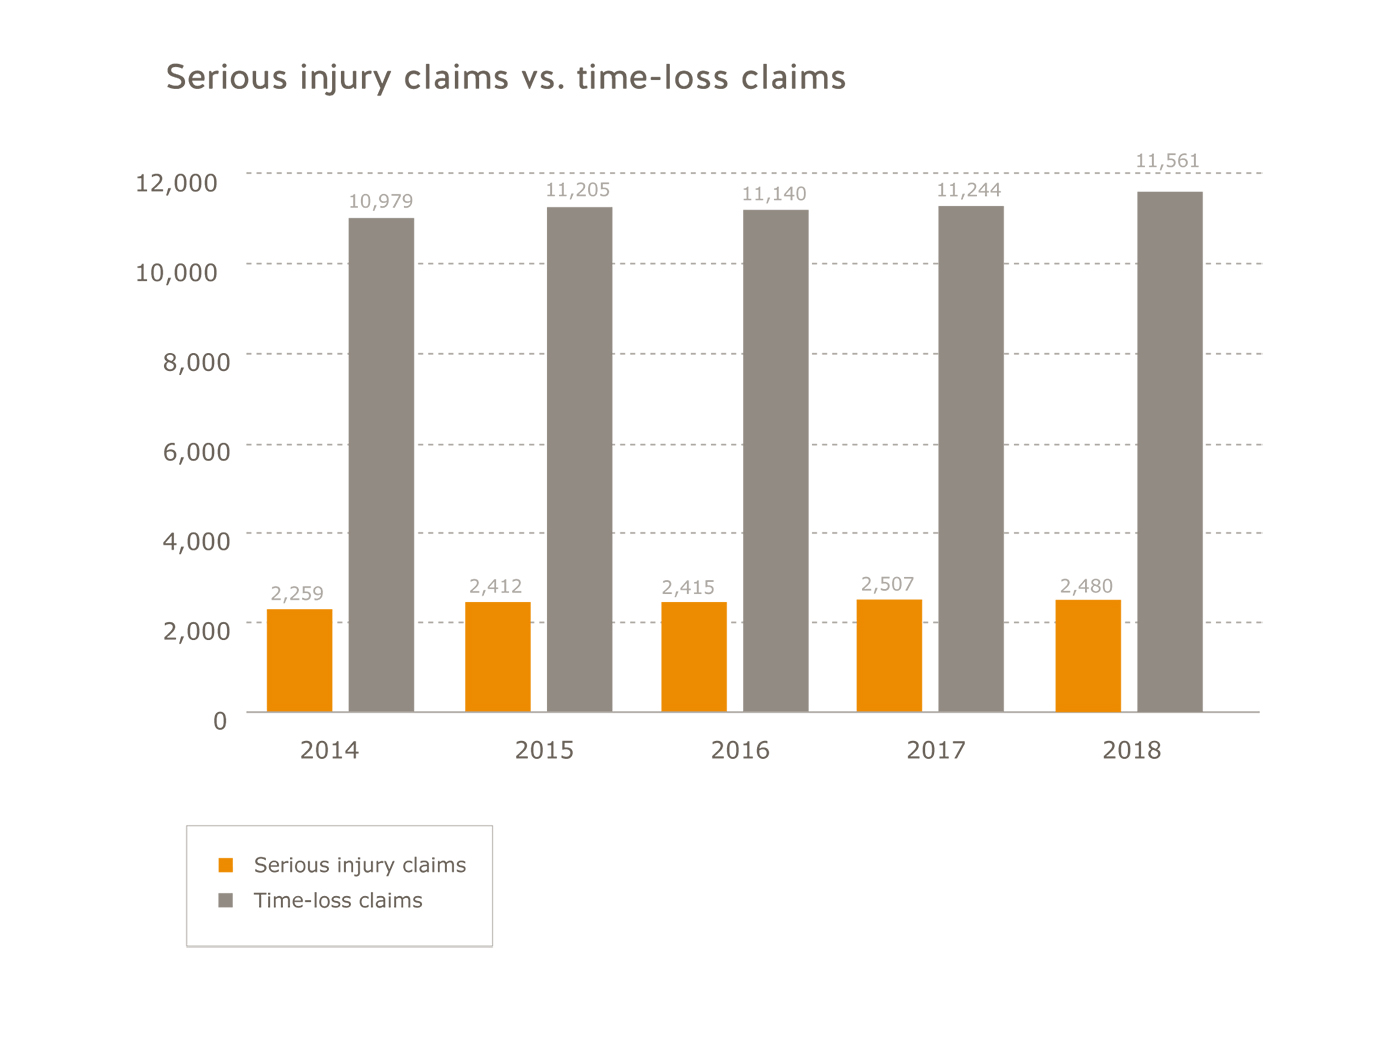 Small business sector serious injury claims vs. time-loss claims for 2014 to 2018. Serious injury claims: 2014=2,259; 2015=2,412; 2016=2,415; 2017=2,507; 2018=2,480. Time-loss claims: 2014=10,979, 2015=11,205; 2016=11,140; 2017=11,244; 2018=11,561